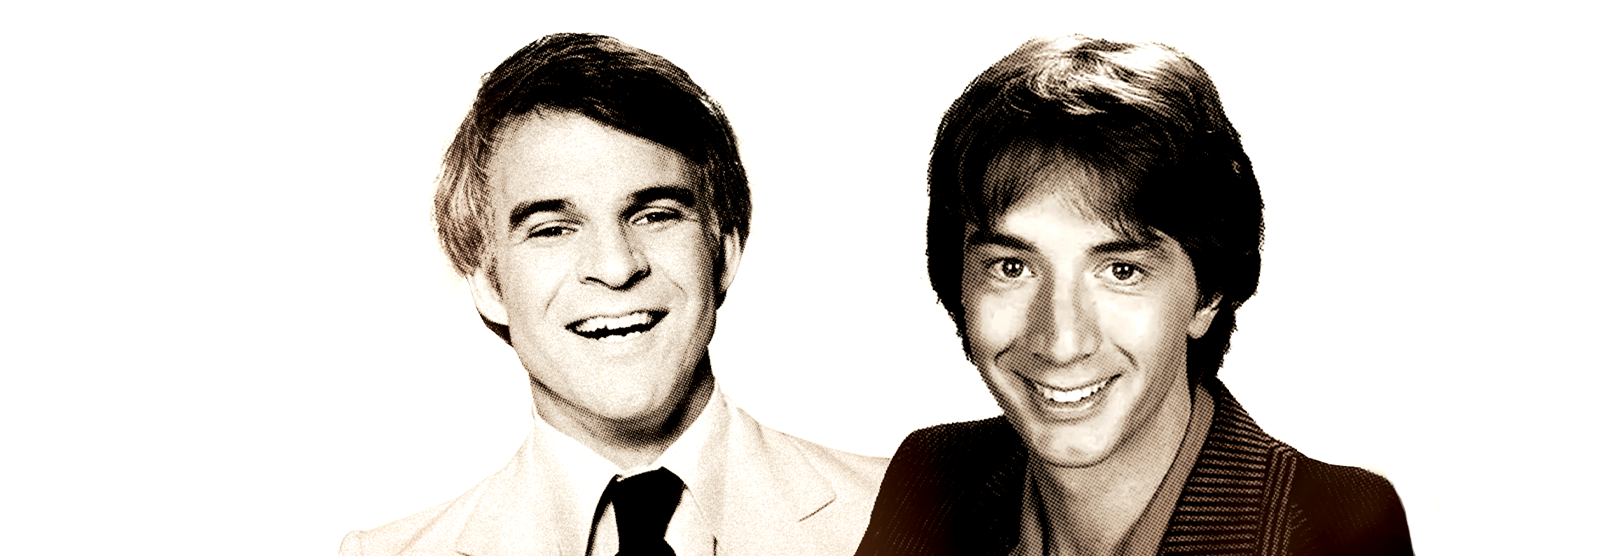 STEVE MARTIN & MARTIN SHORT: “You Won’t Believe What They Look Like Today!” 